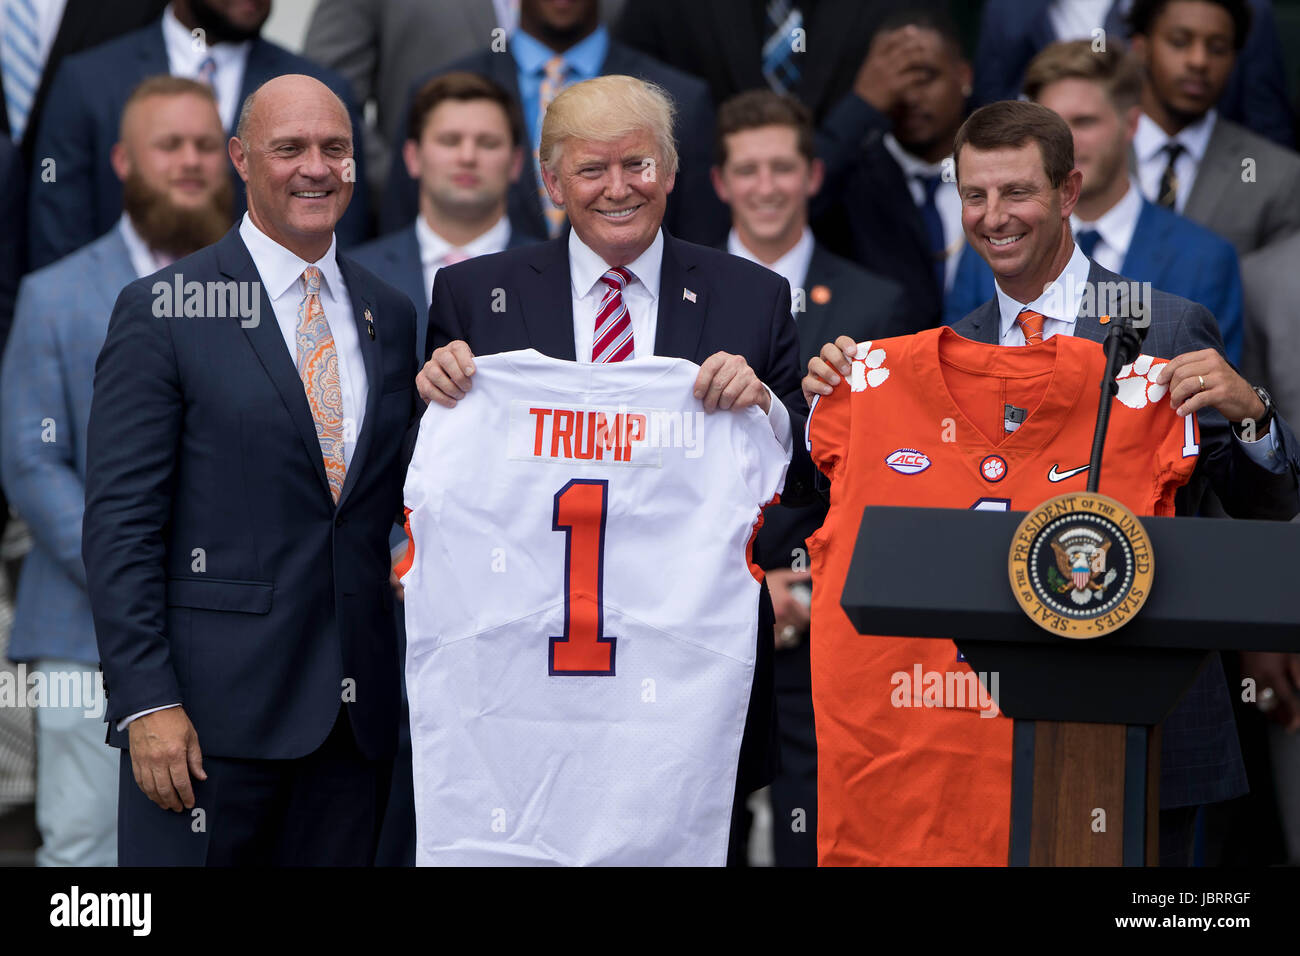 Washington, DC, USA. 12th June, 2017. U.S. President Donald Trump poses with football jerseys during a ceremony honoring the 2016 NCAA Football National Champions Clemson University Tigers at the White House in Washington, DC, the United States, on June 12, 2017. Credit: Ting Shen/Xinhua/Alamy Live News Stock Photo